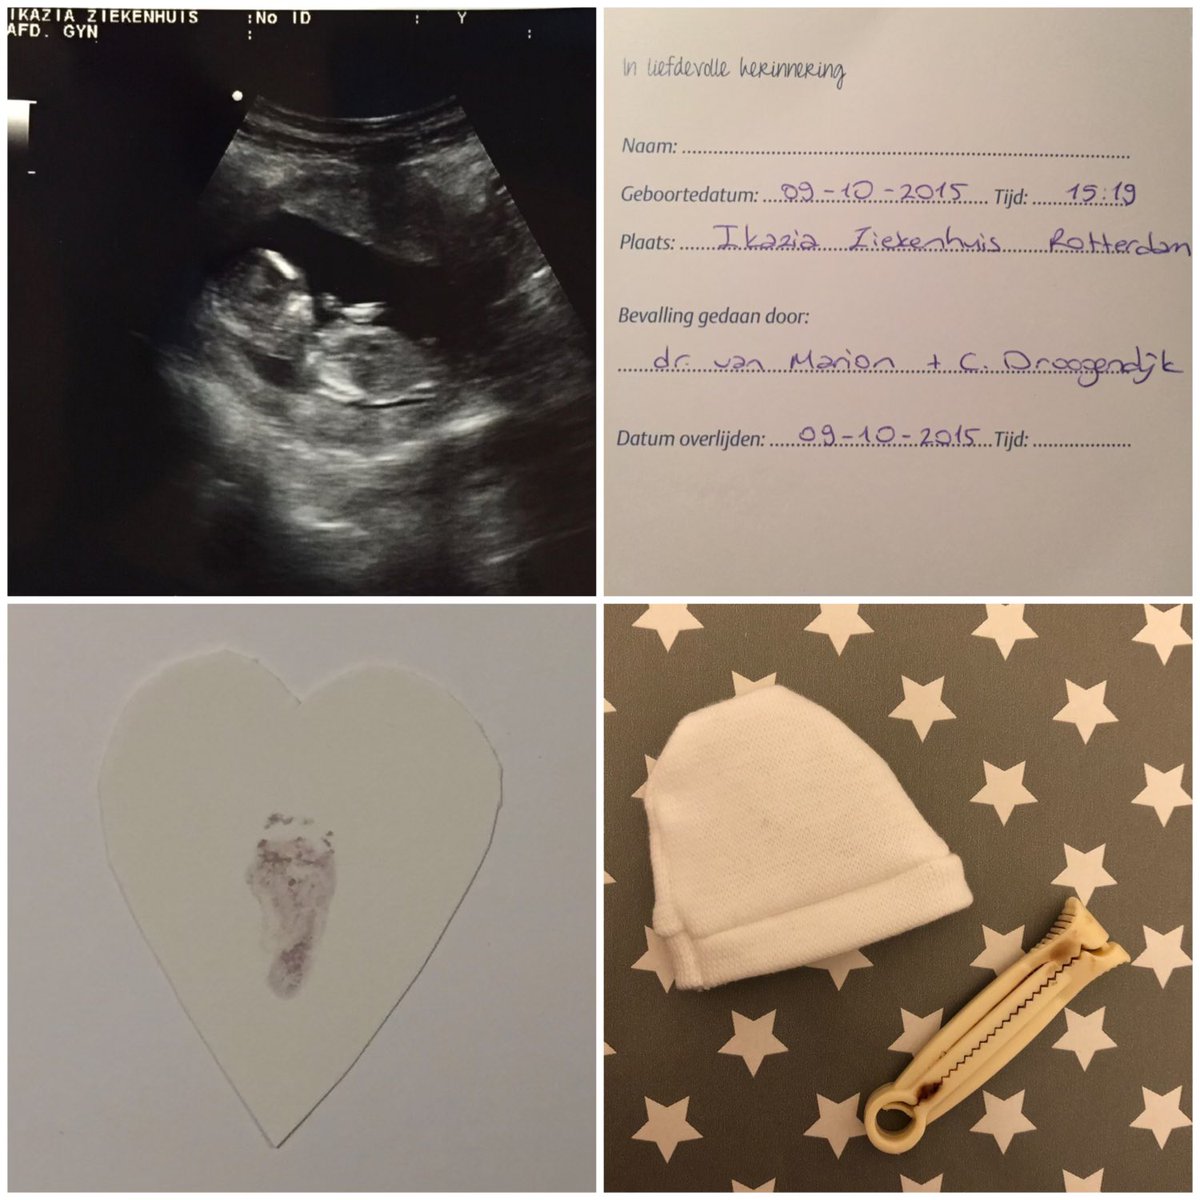 Tonight at 7 PM I’ll light a candle to remember my little baby boy - October 9, 2015 🕯Your wings were ready, but my heart was not…🤍

#WorldwideCandleLightingDay #wereldlichtjesdag #candlelightningday #stillbirth #infantloss #pregnancyloss